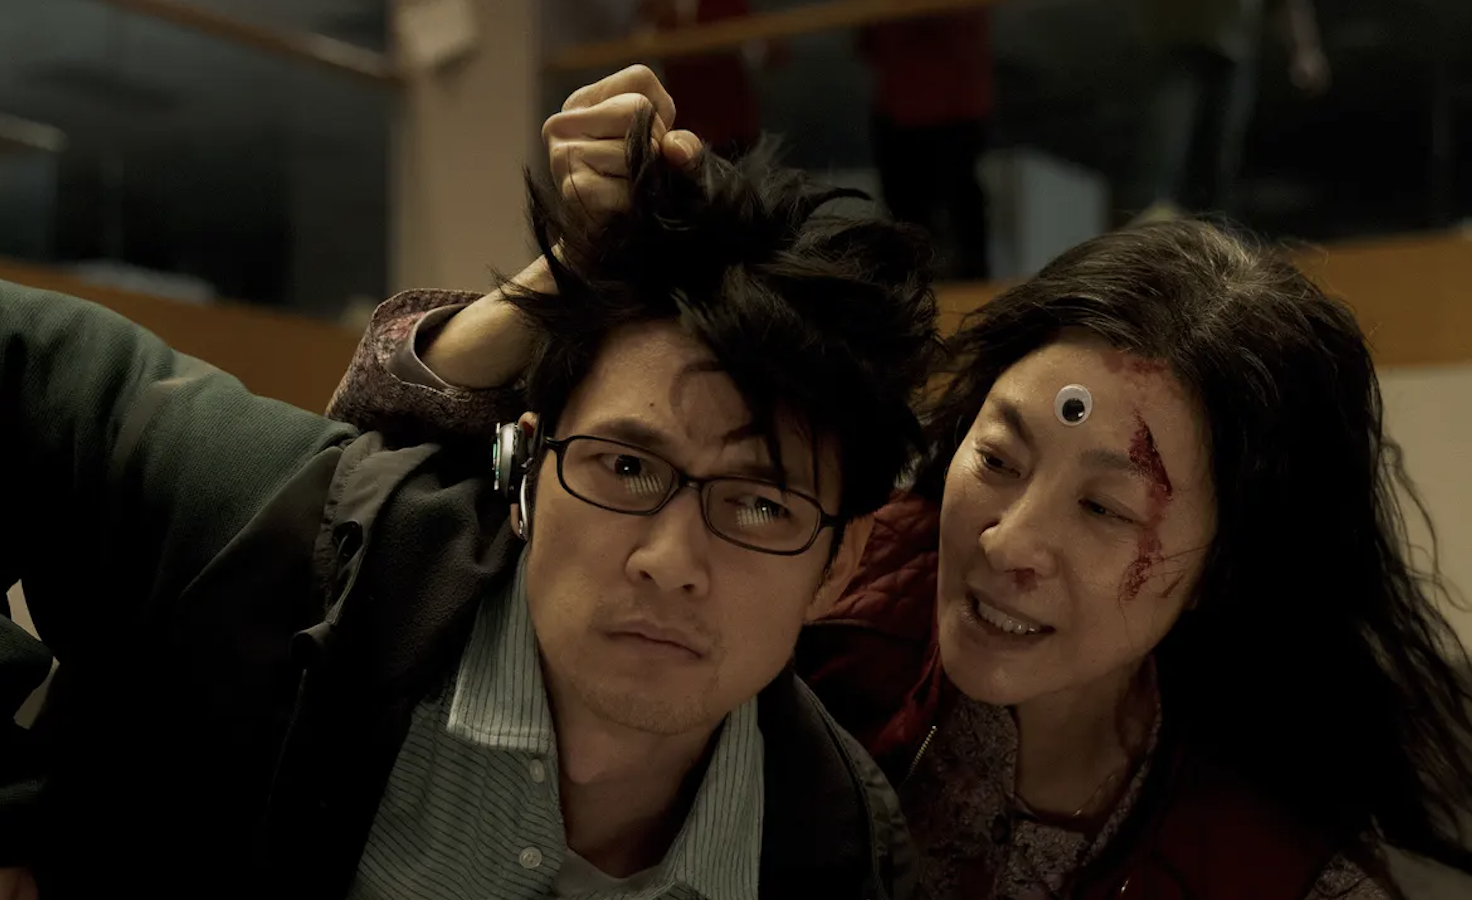 Michelle Yeoh as Evelyn holding the hair of Harry Shum Jr. as Chad